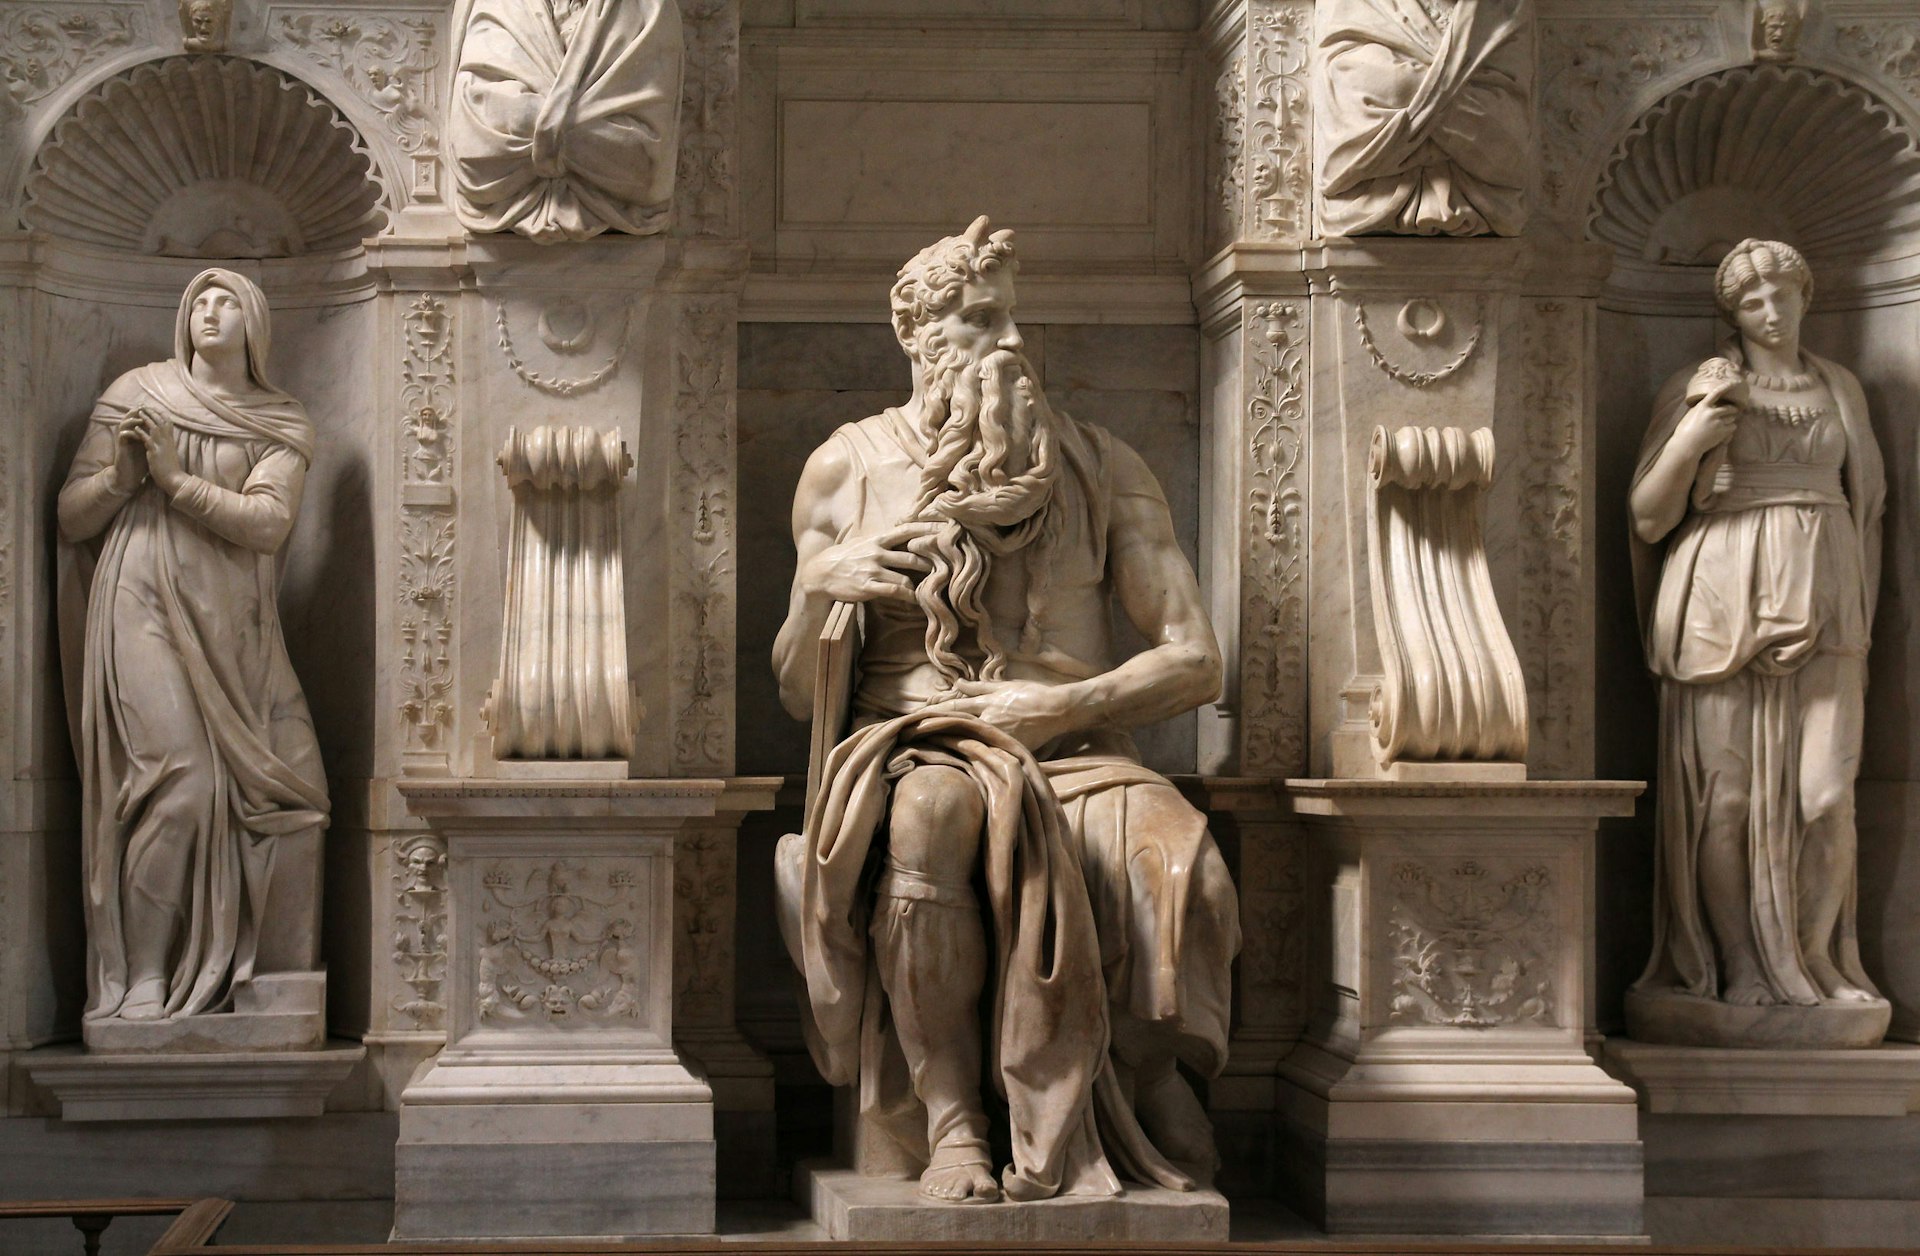 Michelangelo’s marble “Moses” sculpture, with a muscular pose and twisting beard, flanked by two niche sculptures